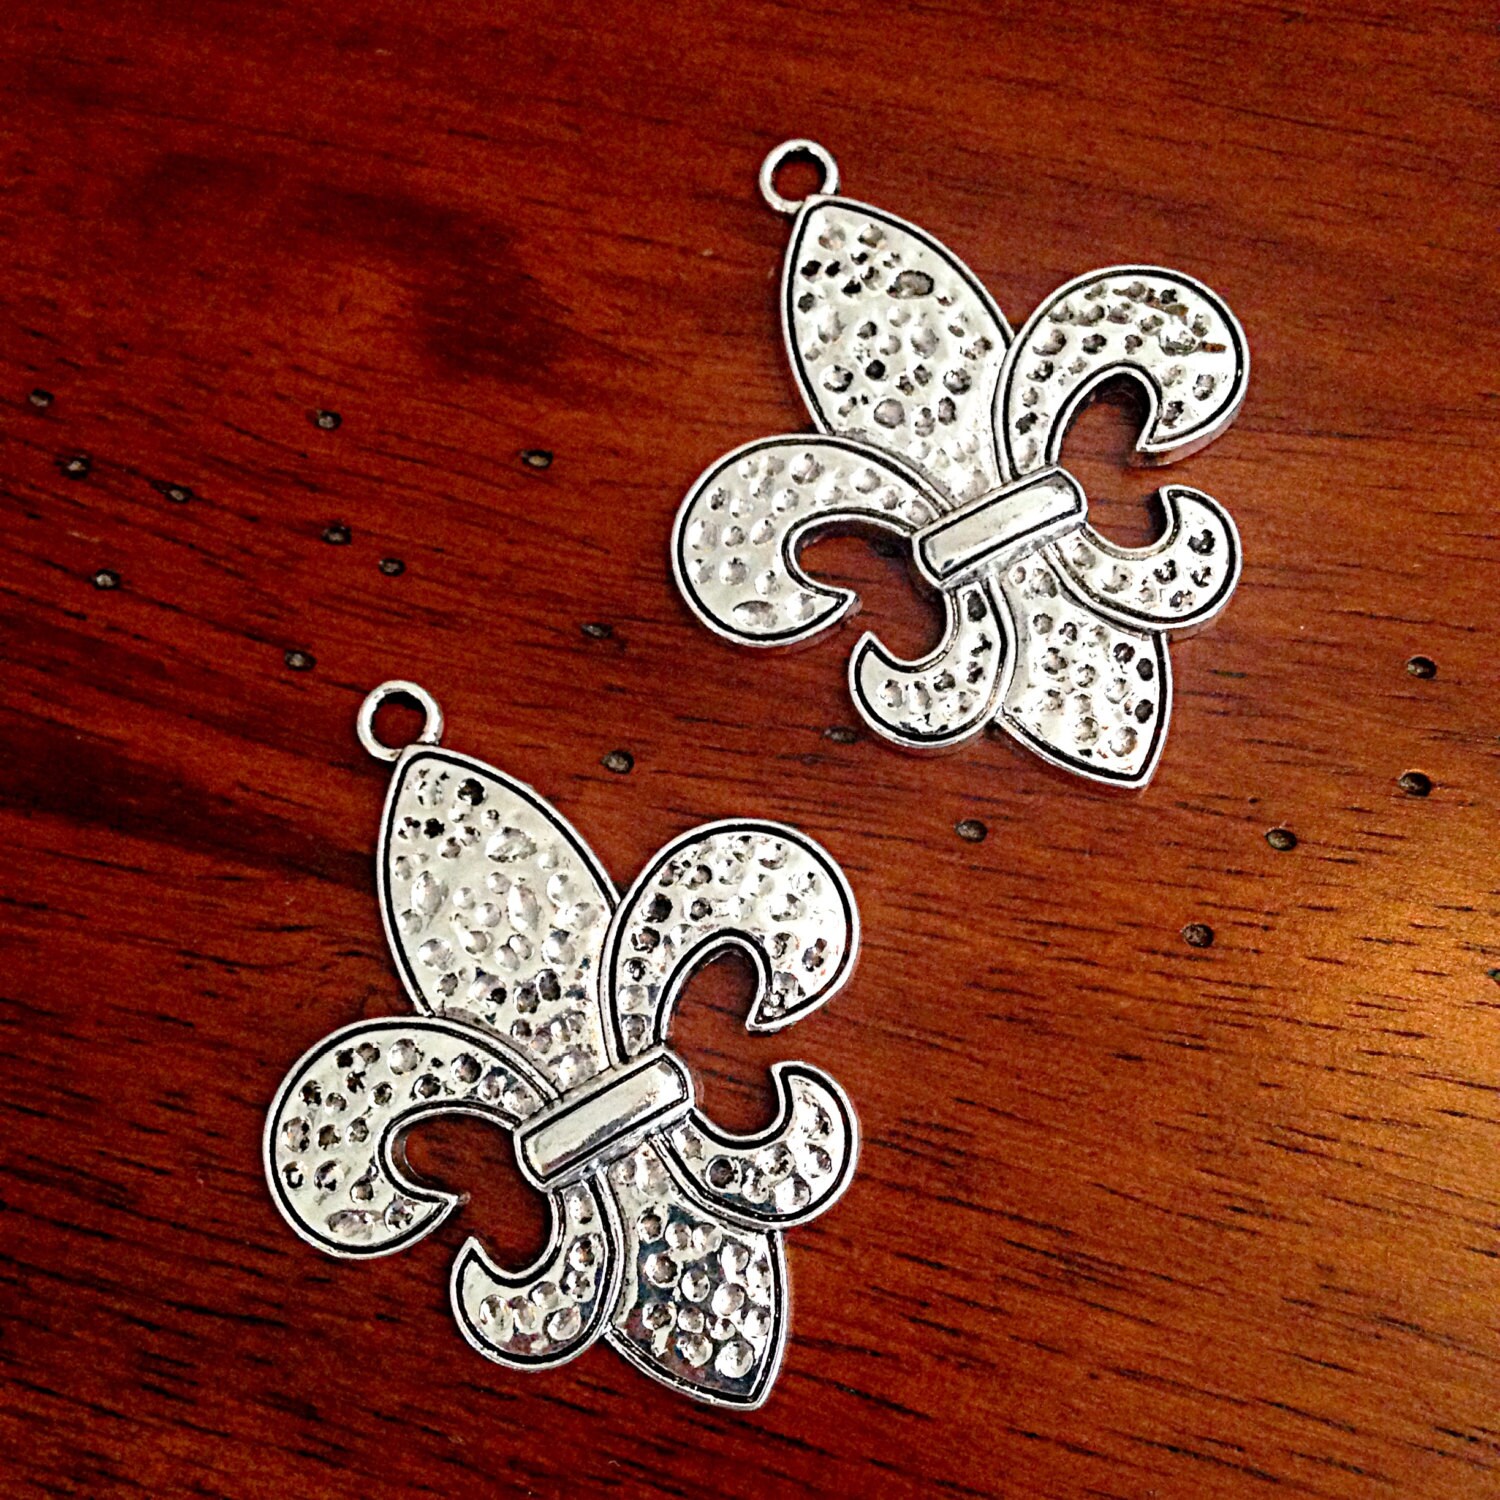 2 New Orleans Charms, Mardi Gras Charms, Antique Silver Pendant